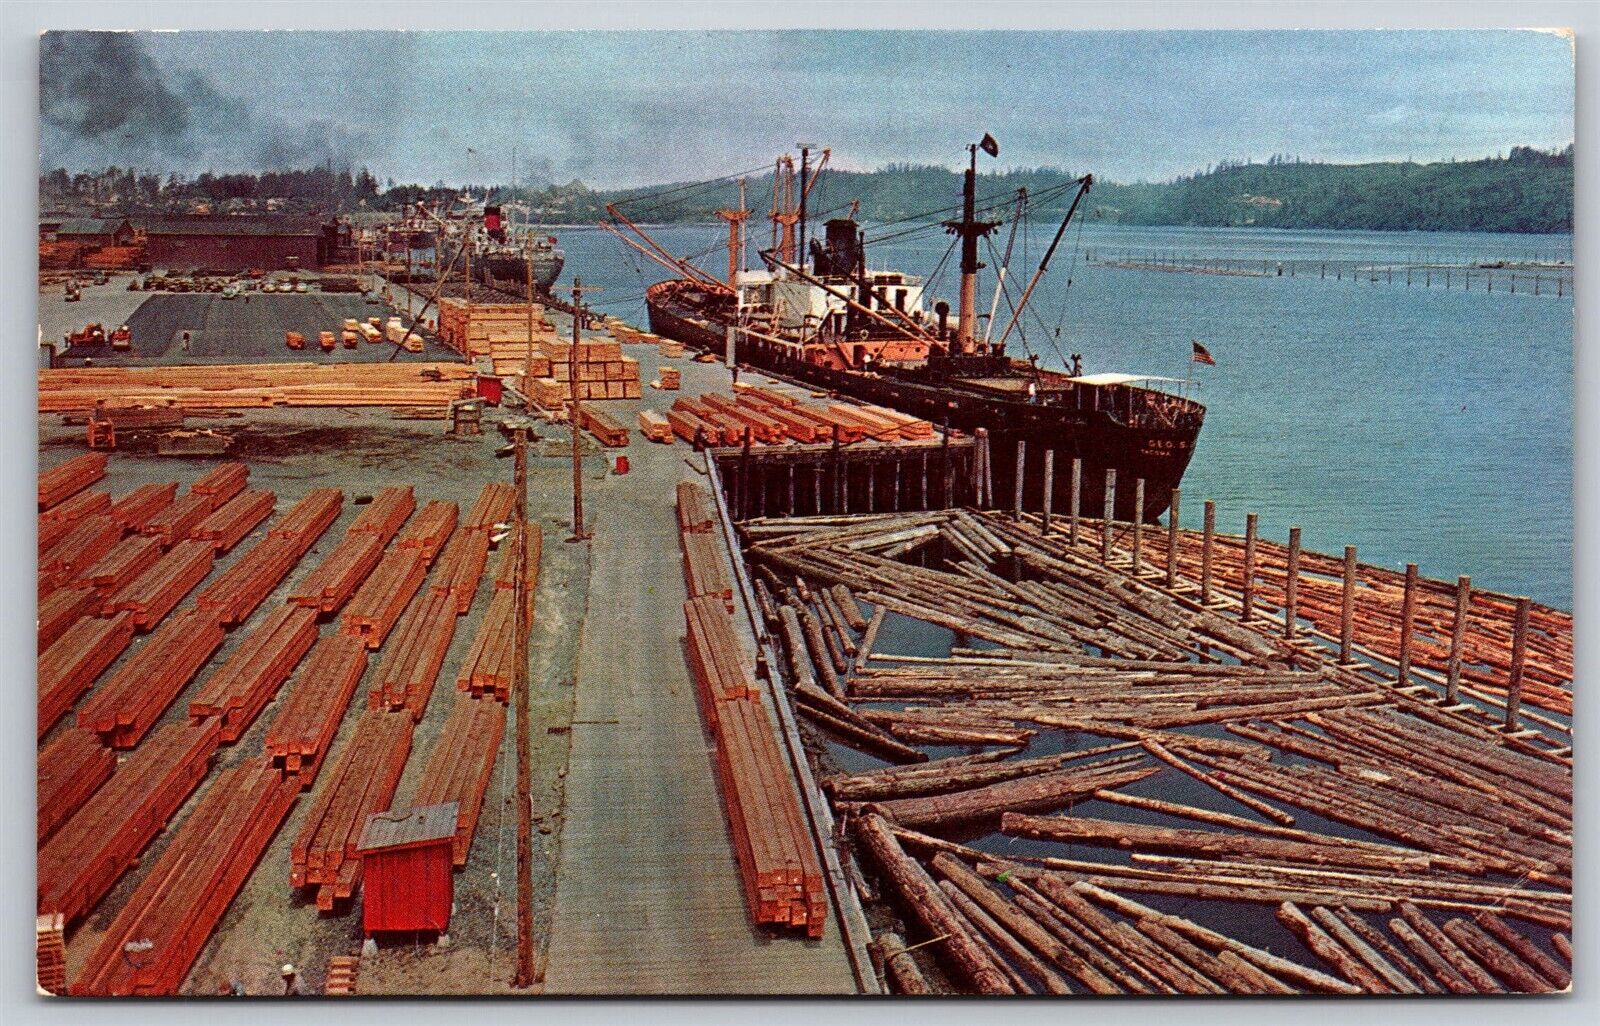 Postcard Transporting Lumber from the Pacific Northwest WA D41